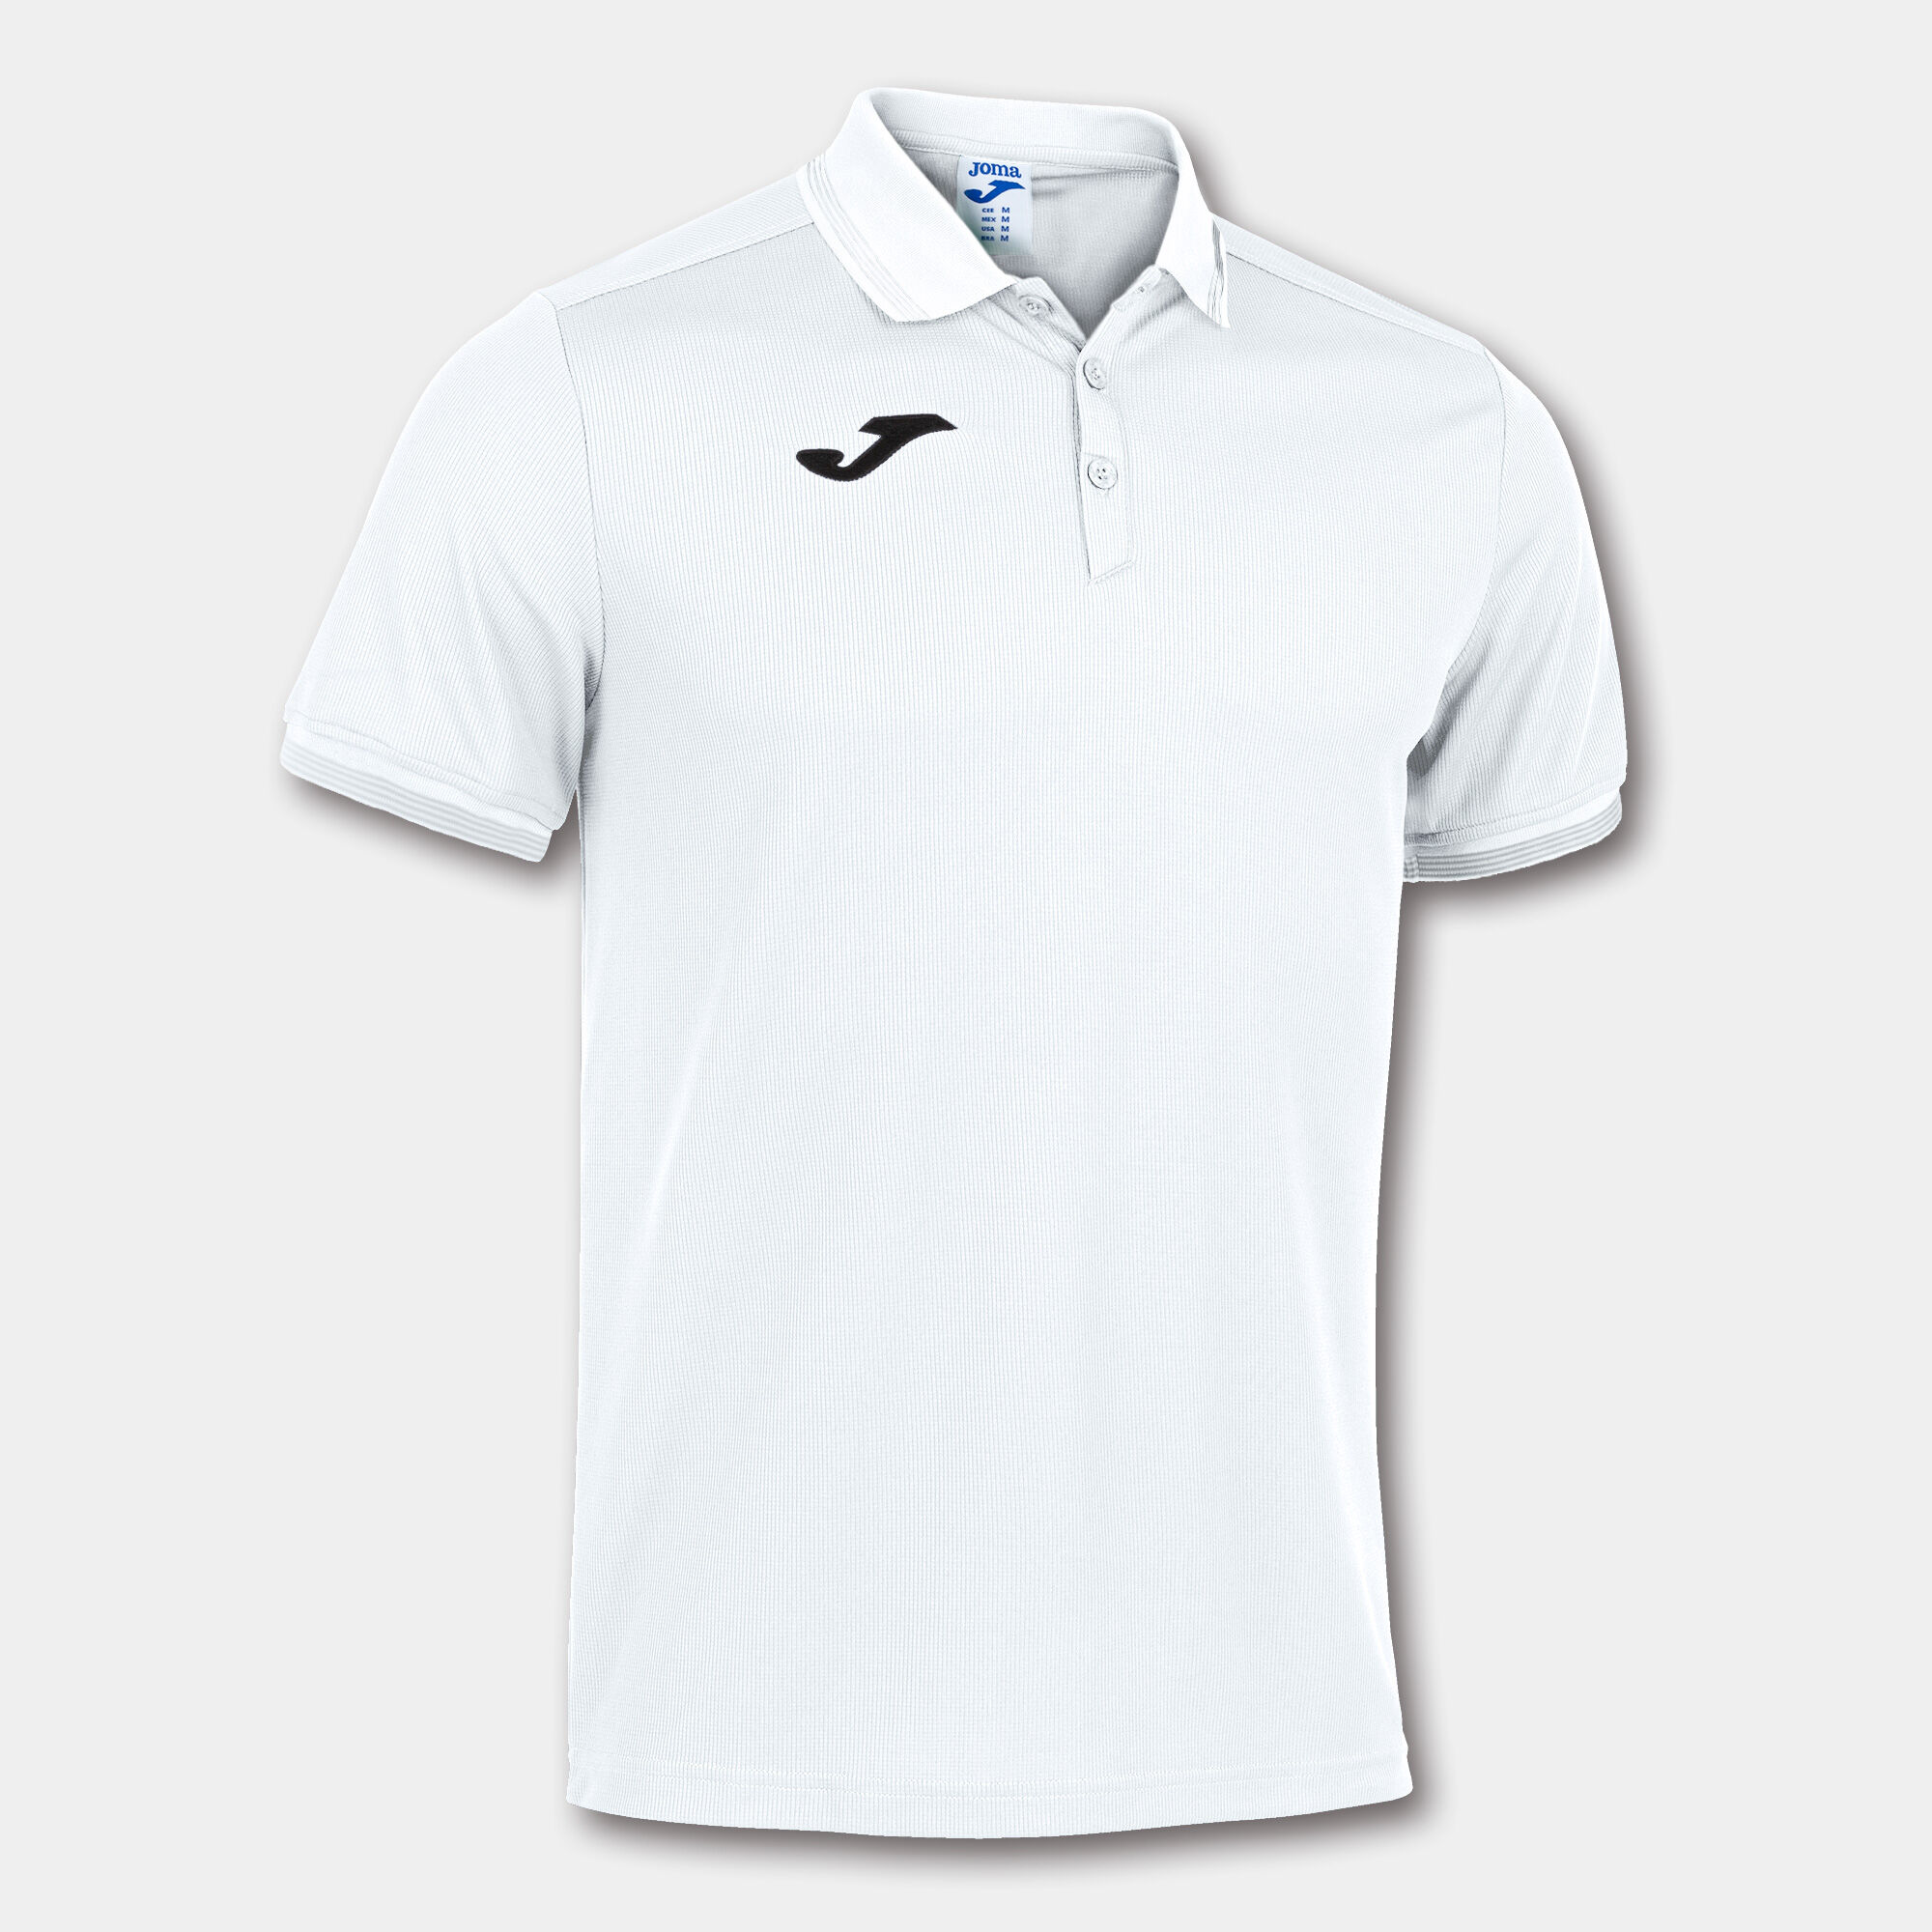 POLO MANCHES COURTES HOMME CAMPUS III BLANC